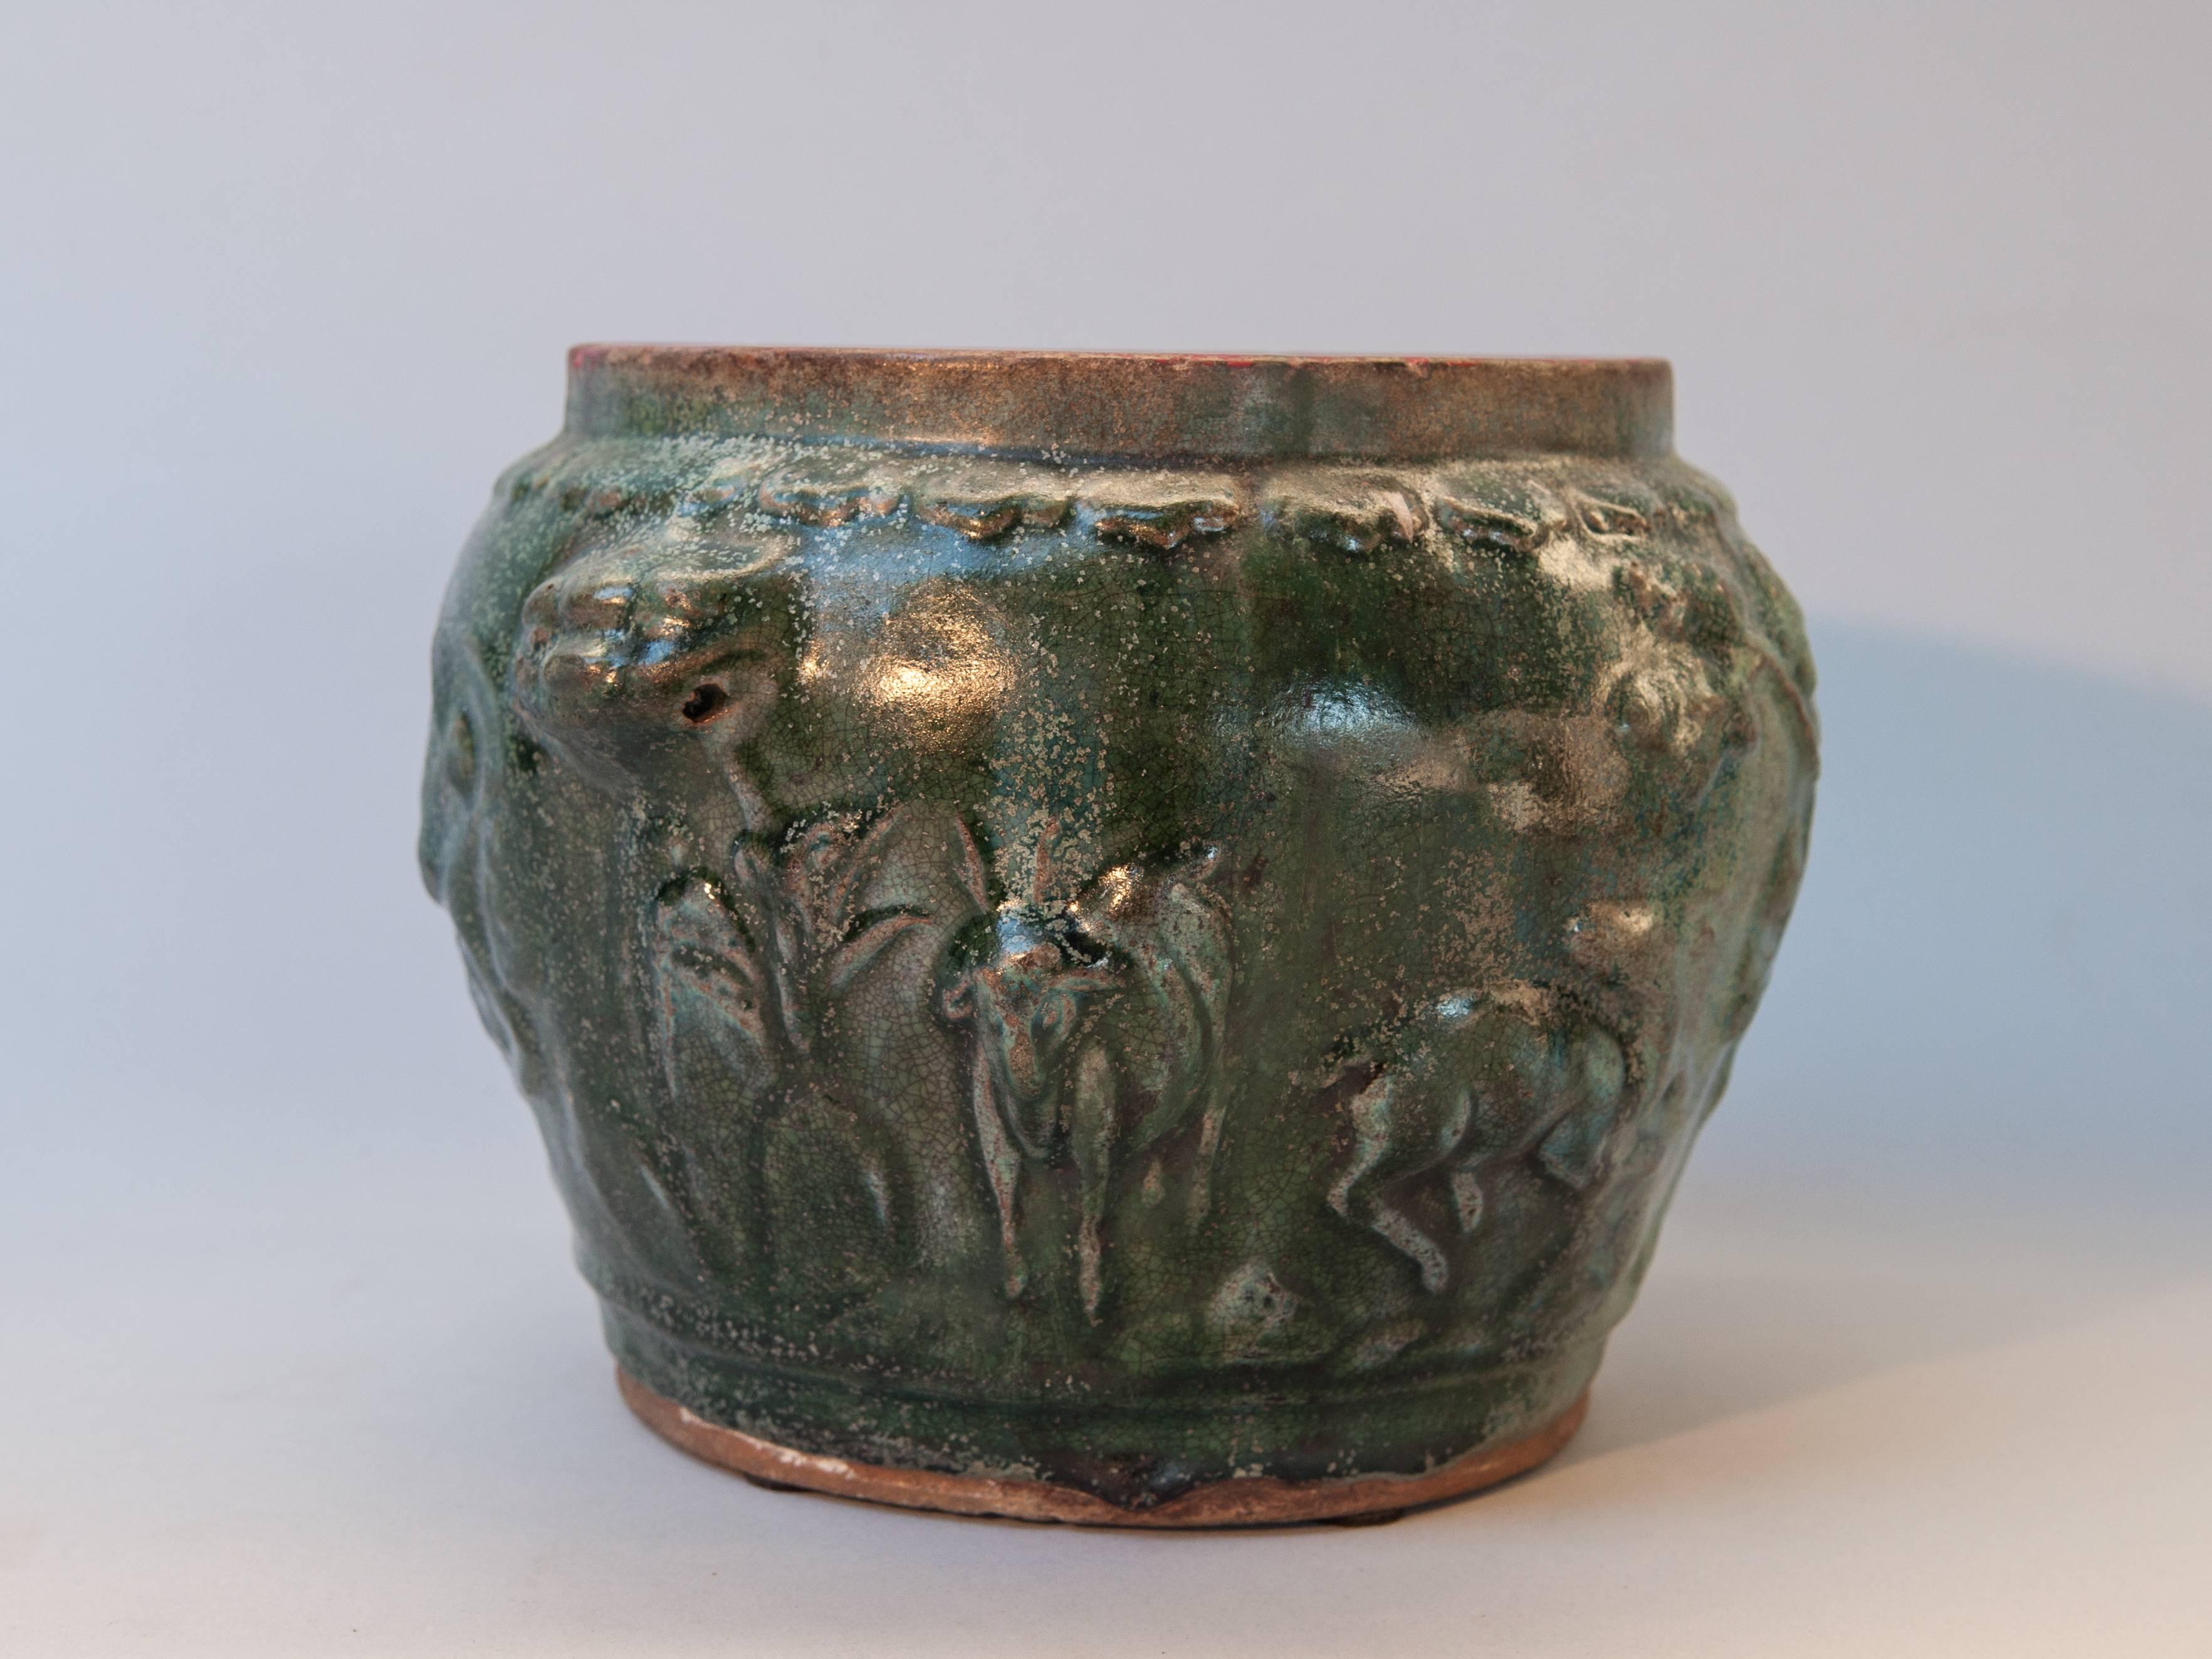 Green glazed pot from Southern Thailand found off Java, late 19th century
This small pot has a lovely multifaceted green glaze and is decorated all around with auspicious three dimensional motifs cherry blossoms, dragons, a deer, an elephant and